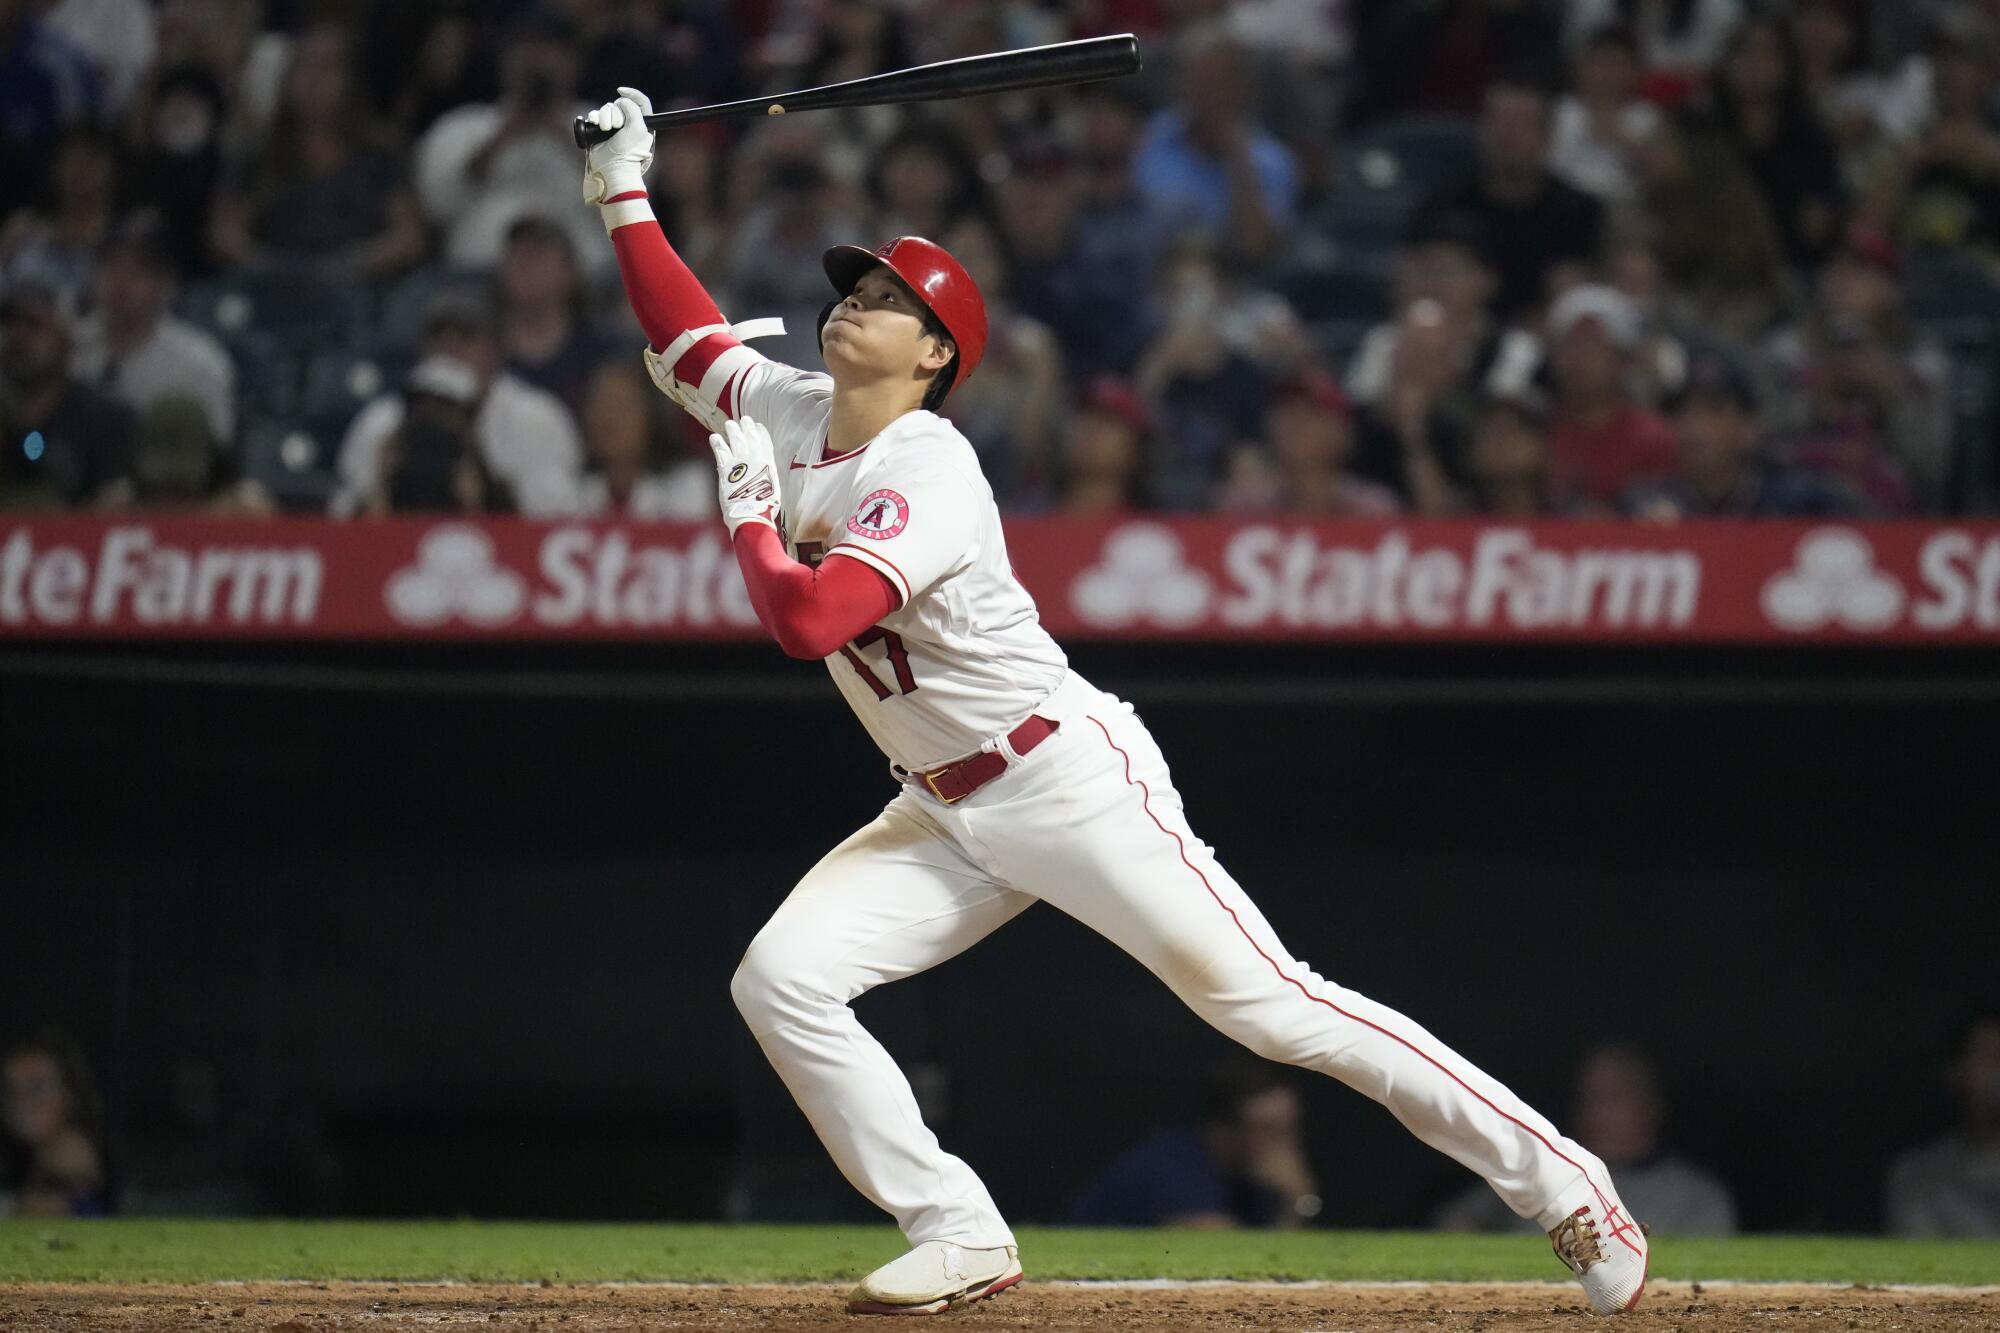  Angels two-way star Shohei Ohtani takes a swing against Boston